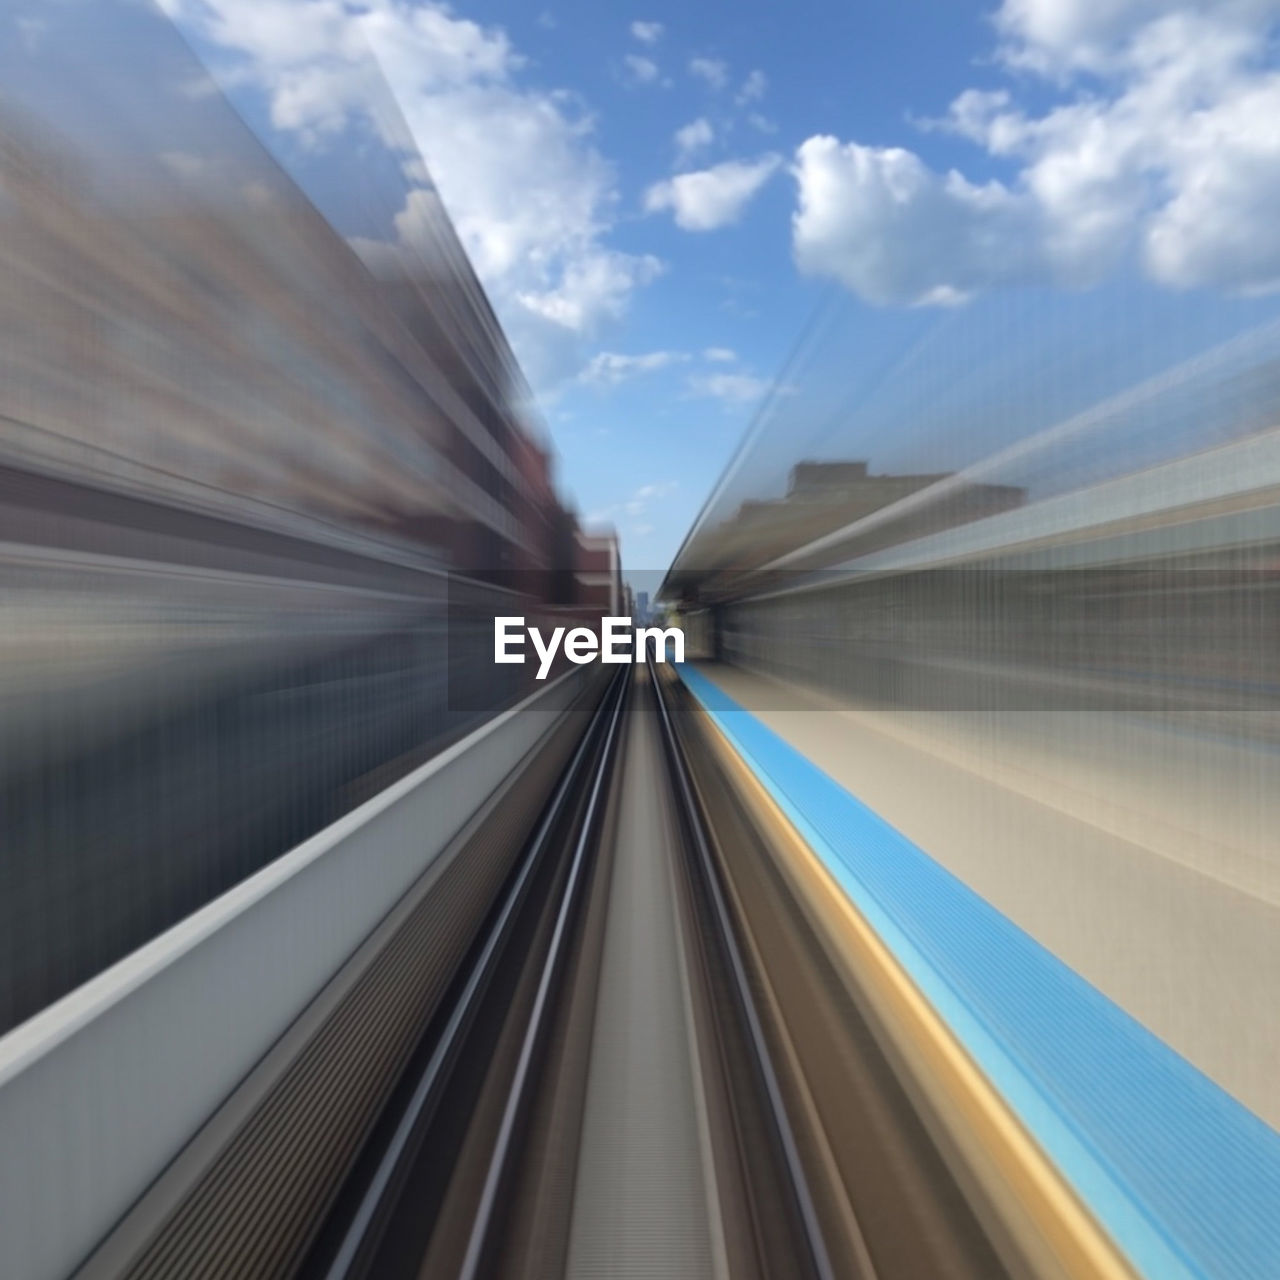 BLURRED MOTION OF TRAIN MOVING ON RAILROAD TRACK